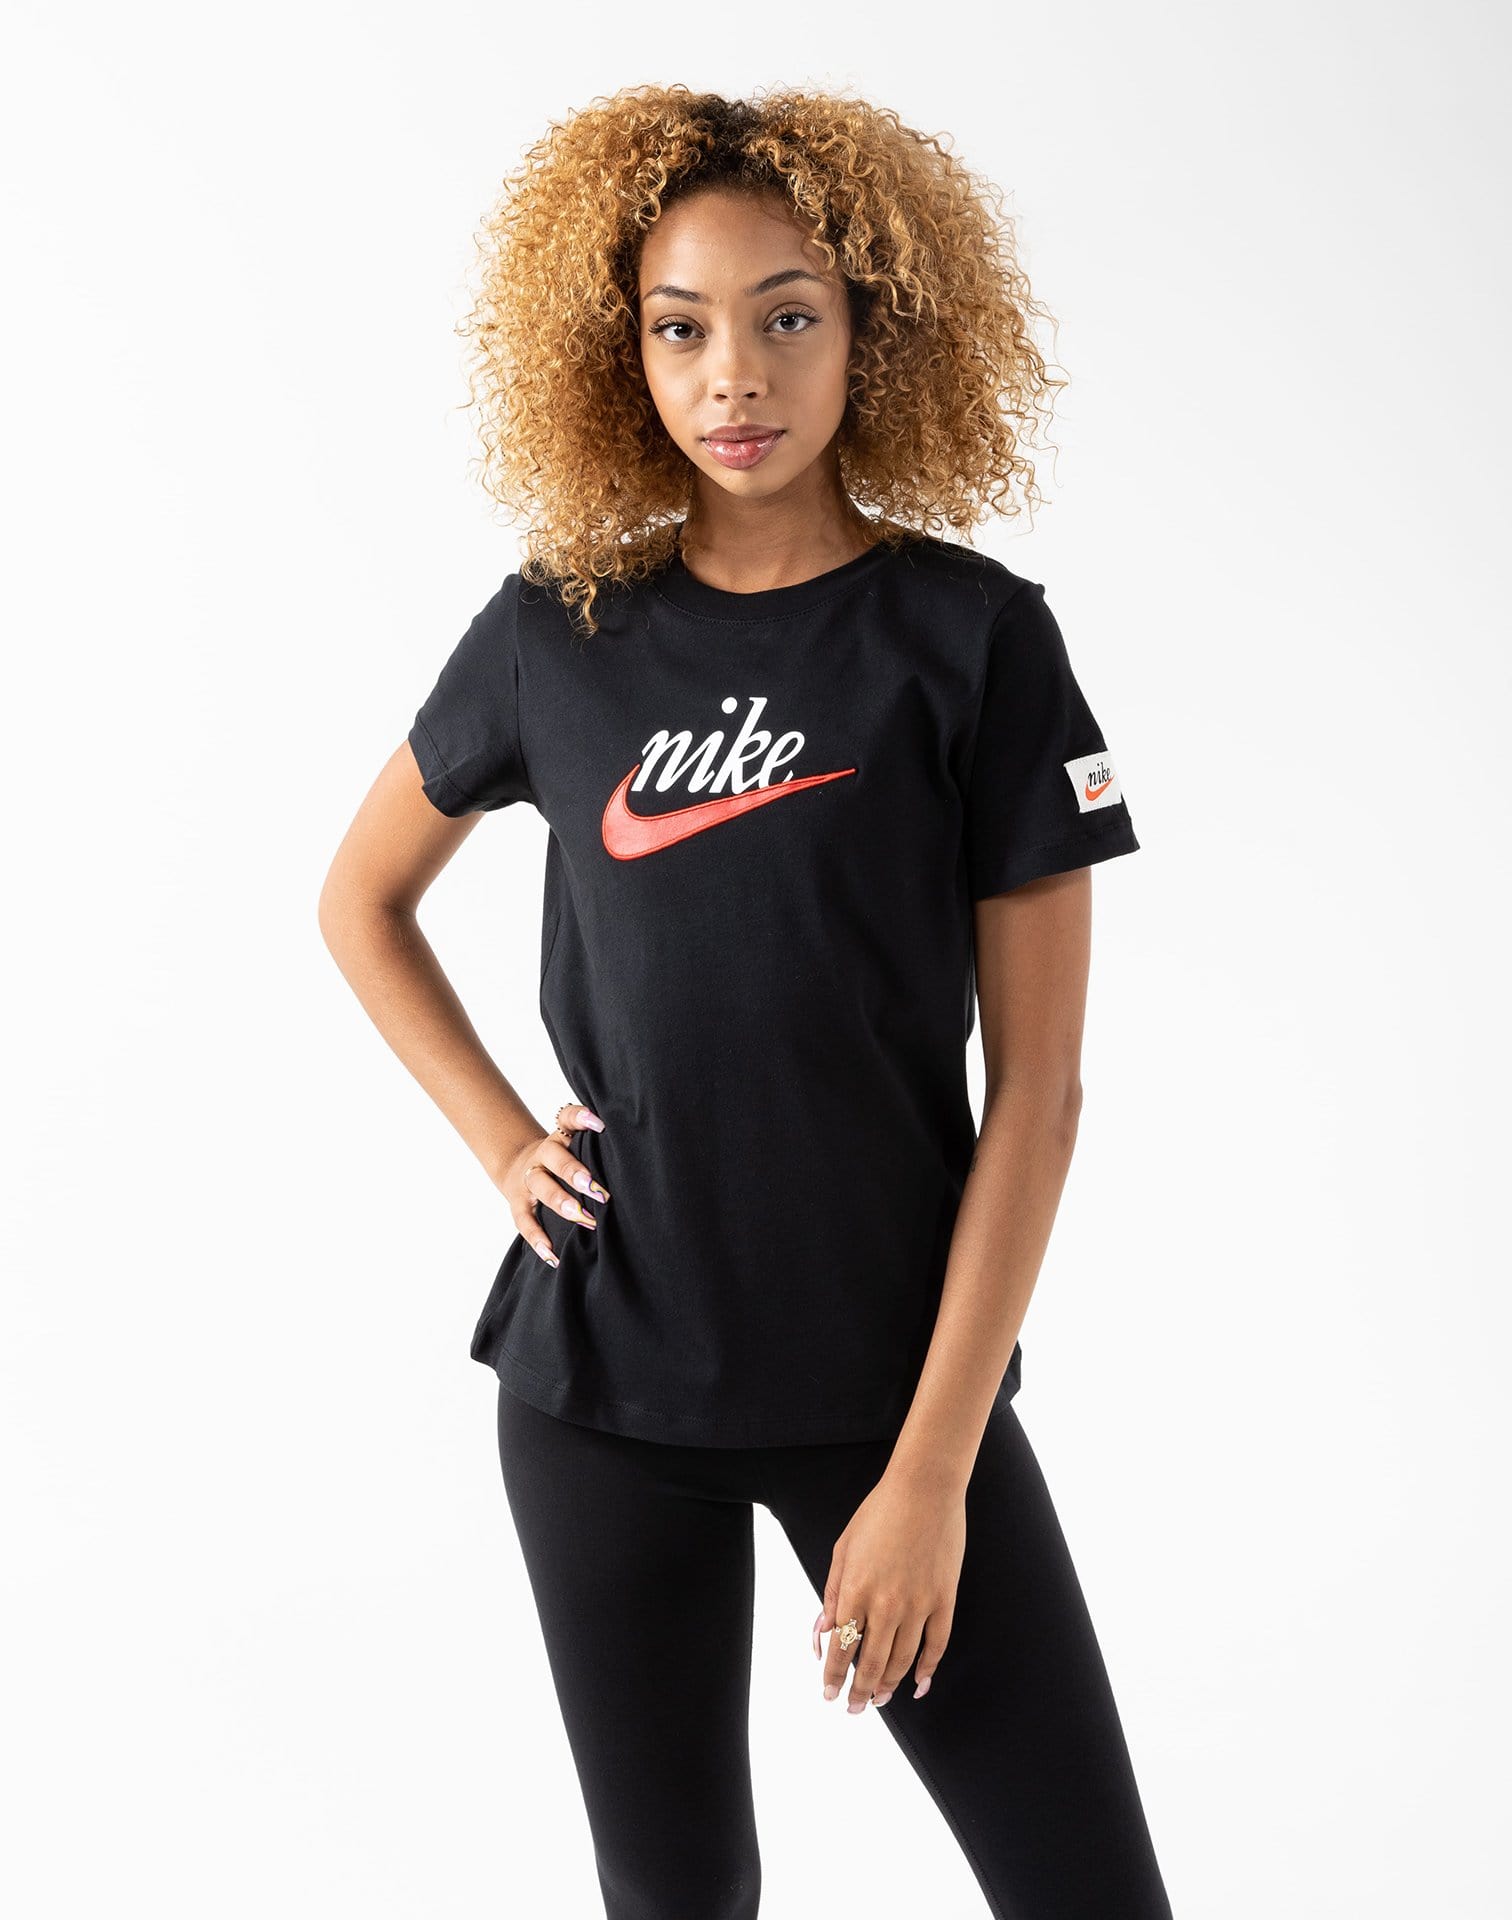 dtlr.com is where to buy